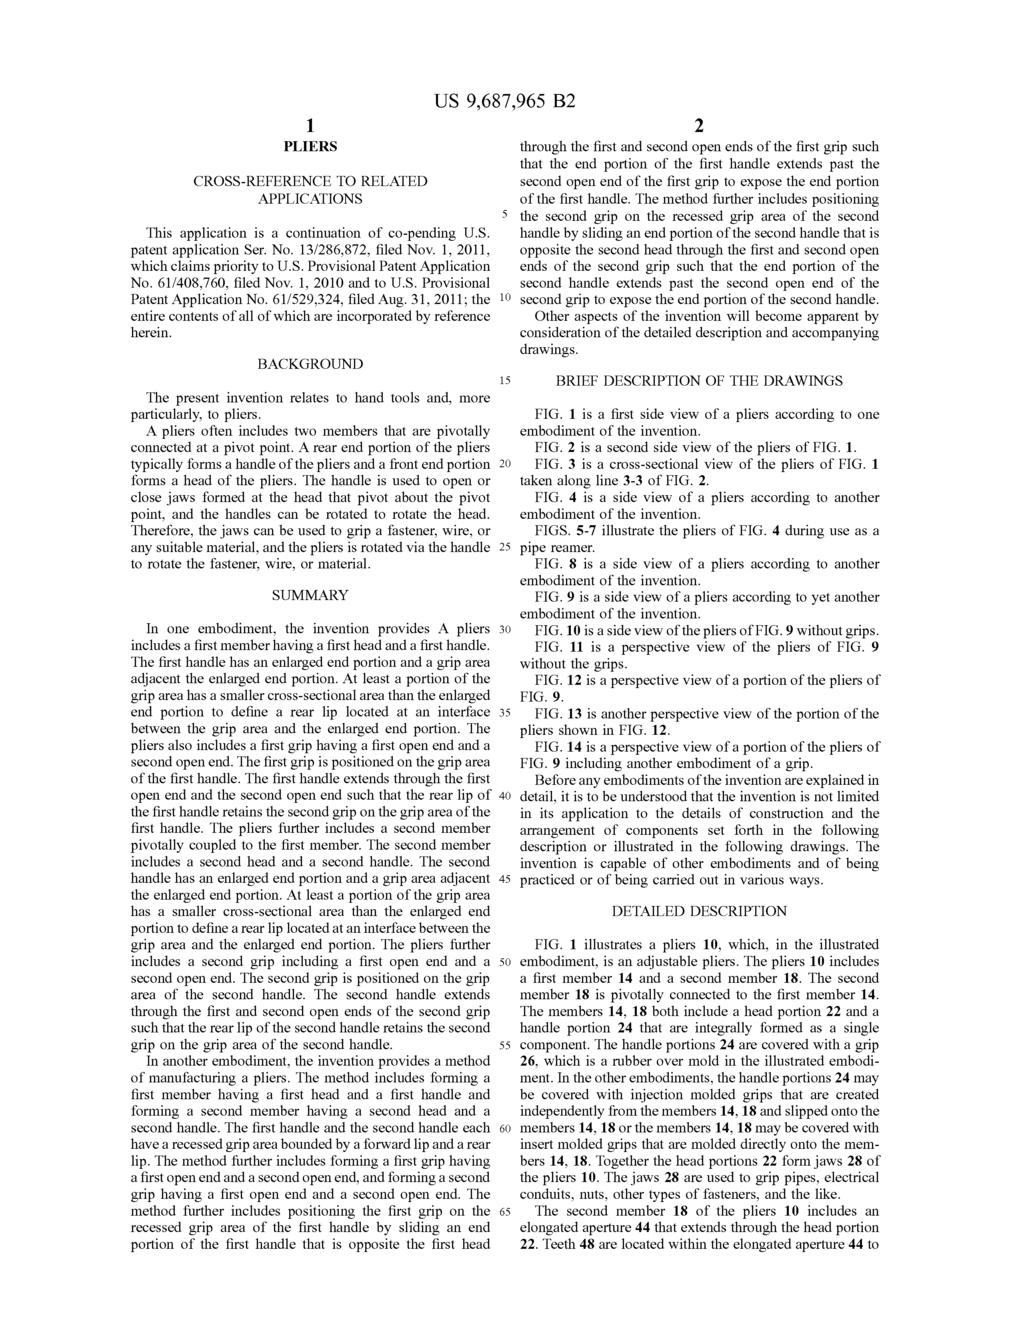 1. PLERS CROSS-REFERENCE TO RELATED APPLICATIONS This application is a continuation of co-pending U.S. patent application Ser. No. 13/286,872, filed Nov. 1, 2011, which claims priority to U.S. Provisional Patent Application No.